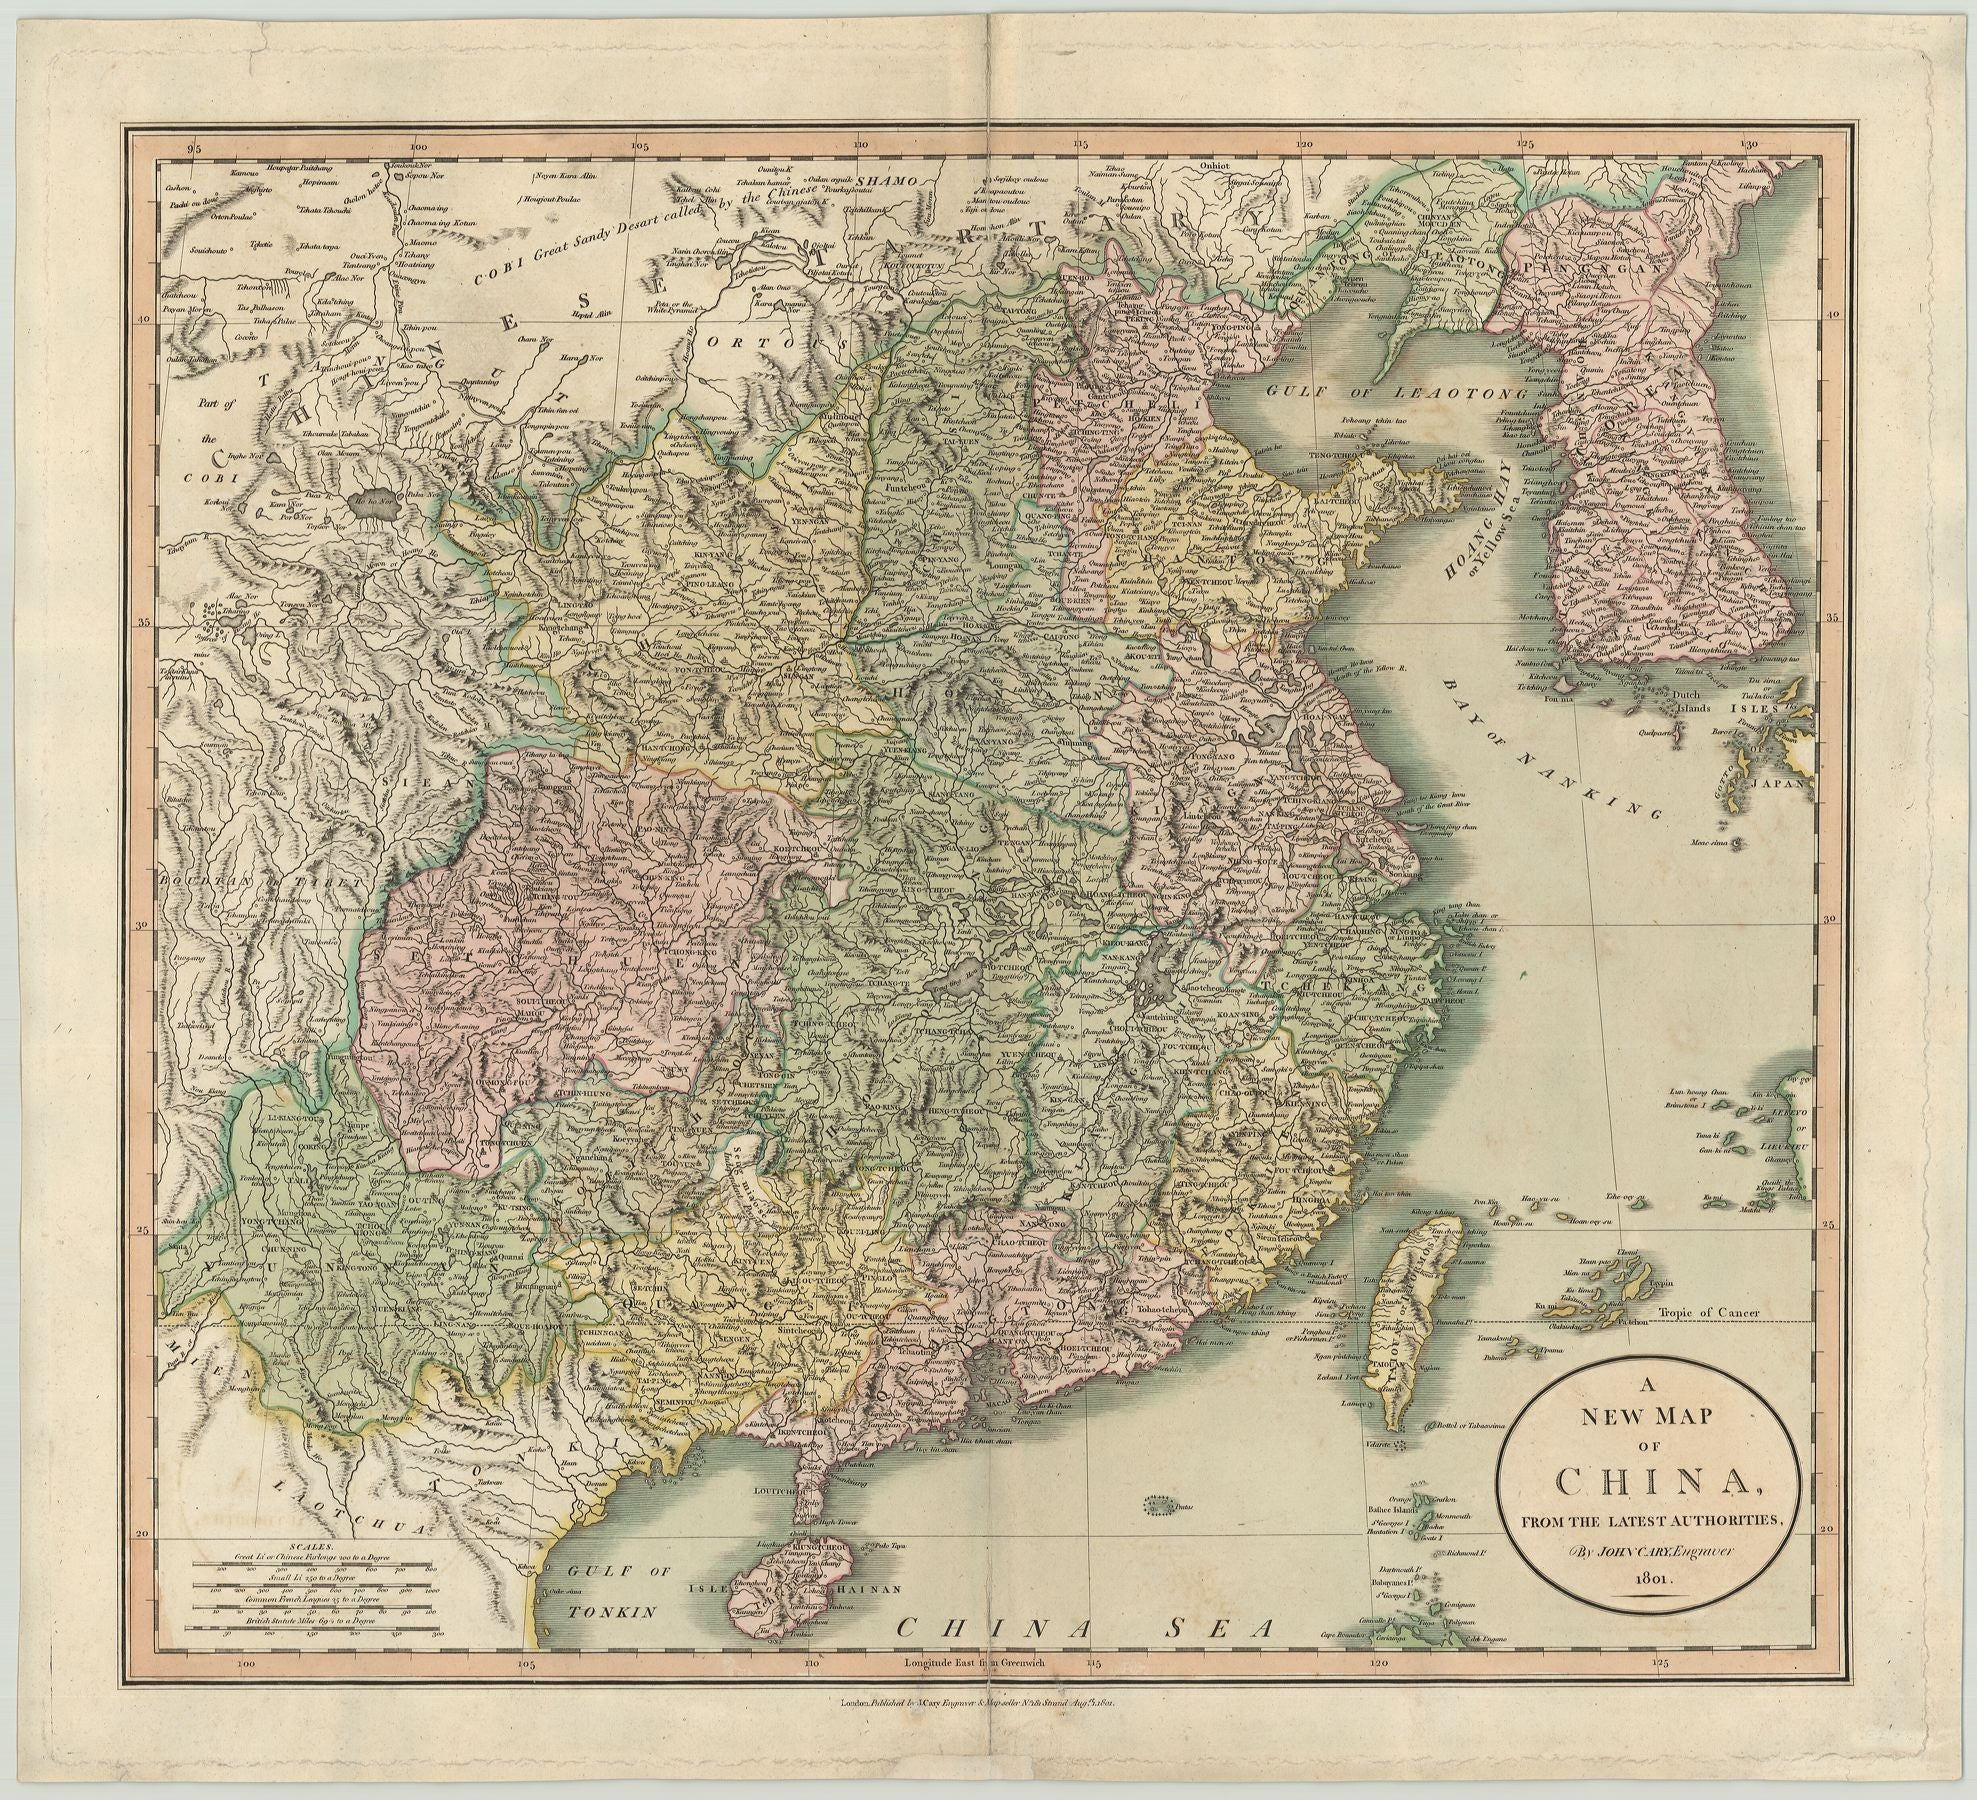 Cary, John: A new Map of China from the latest Authorities 1801